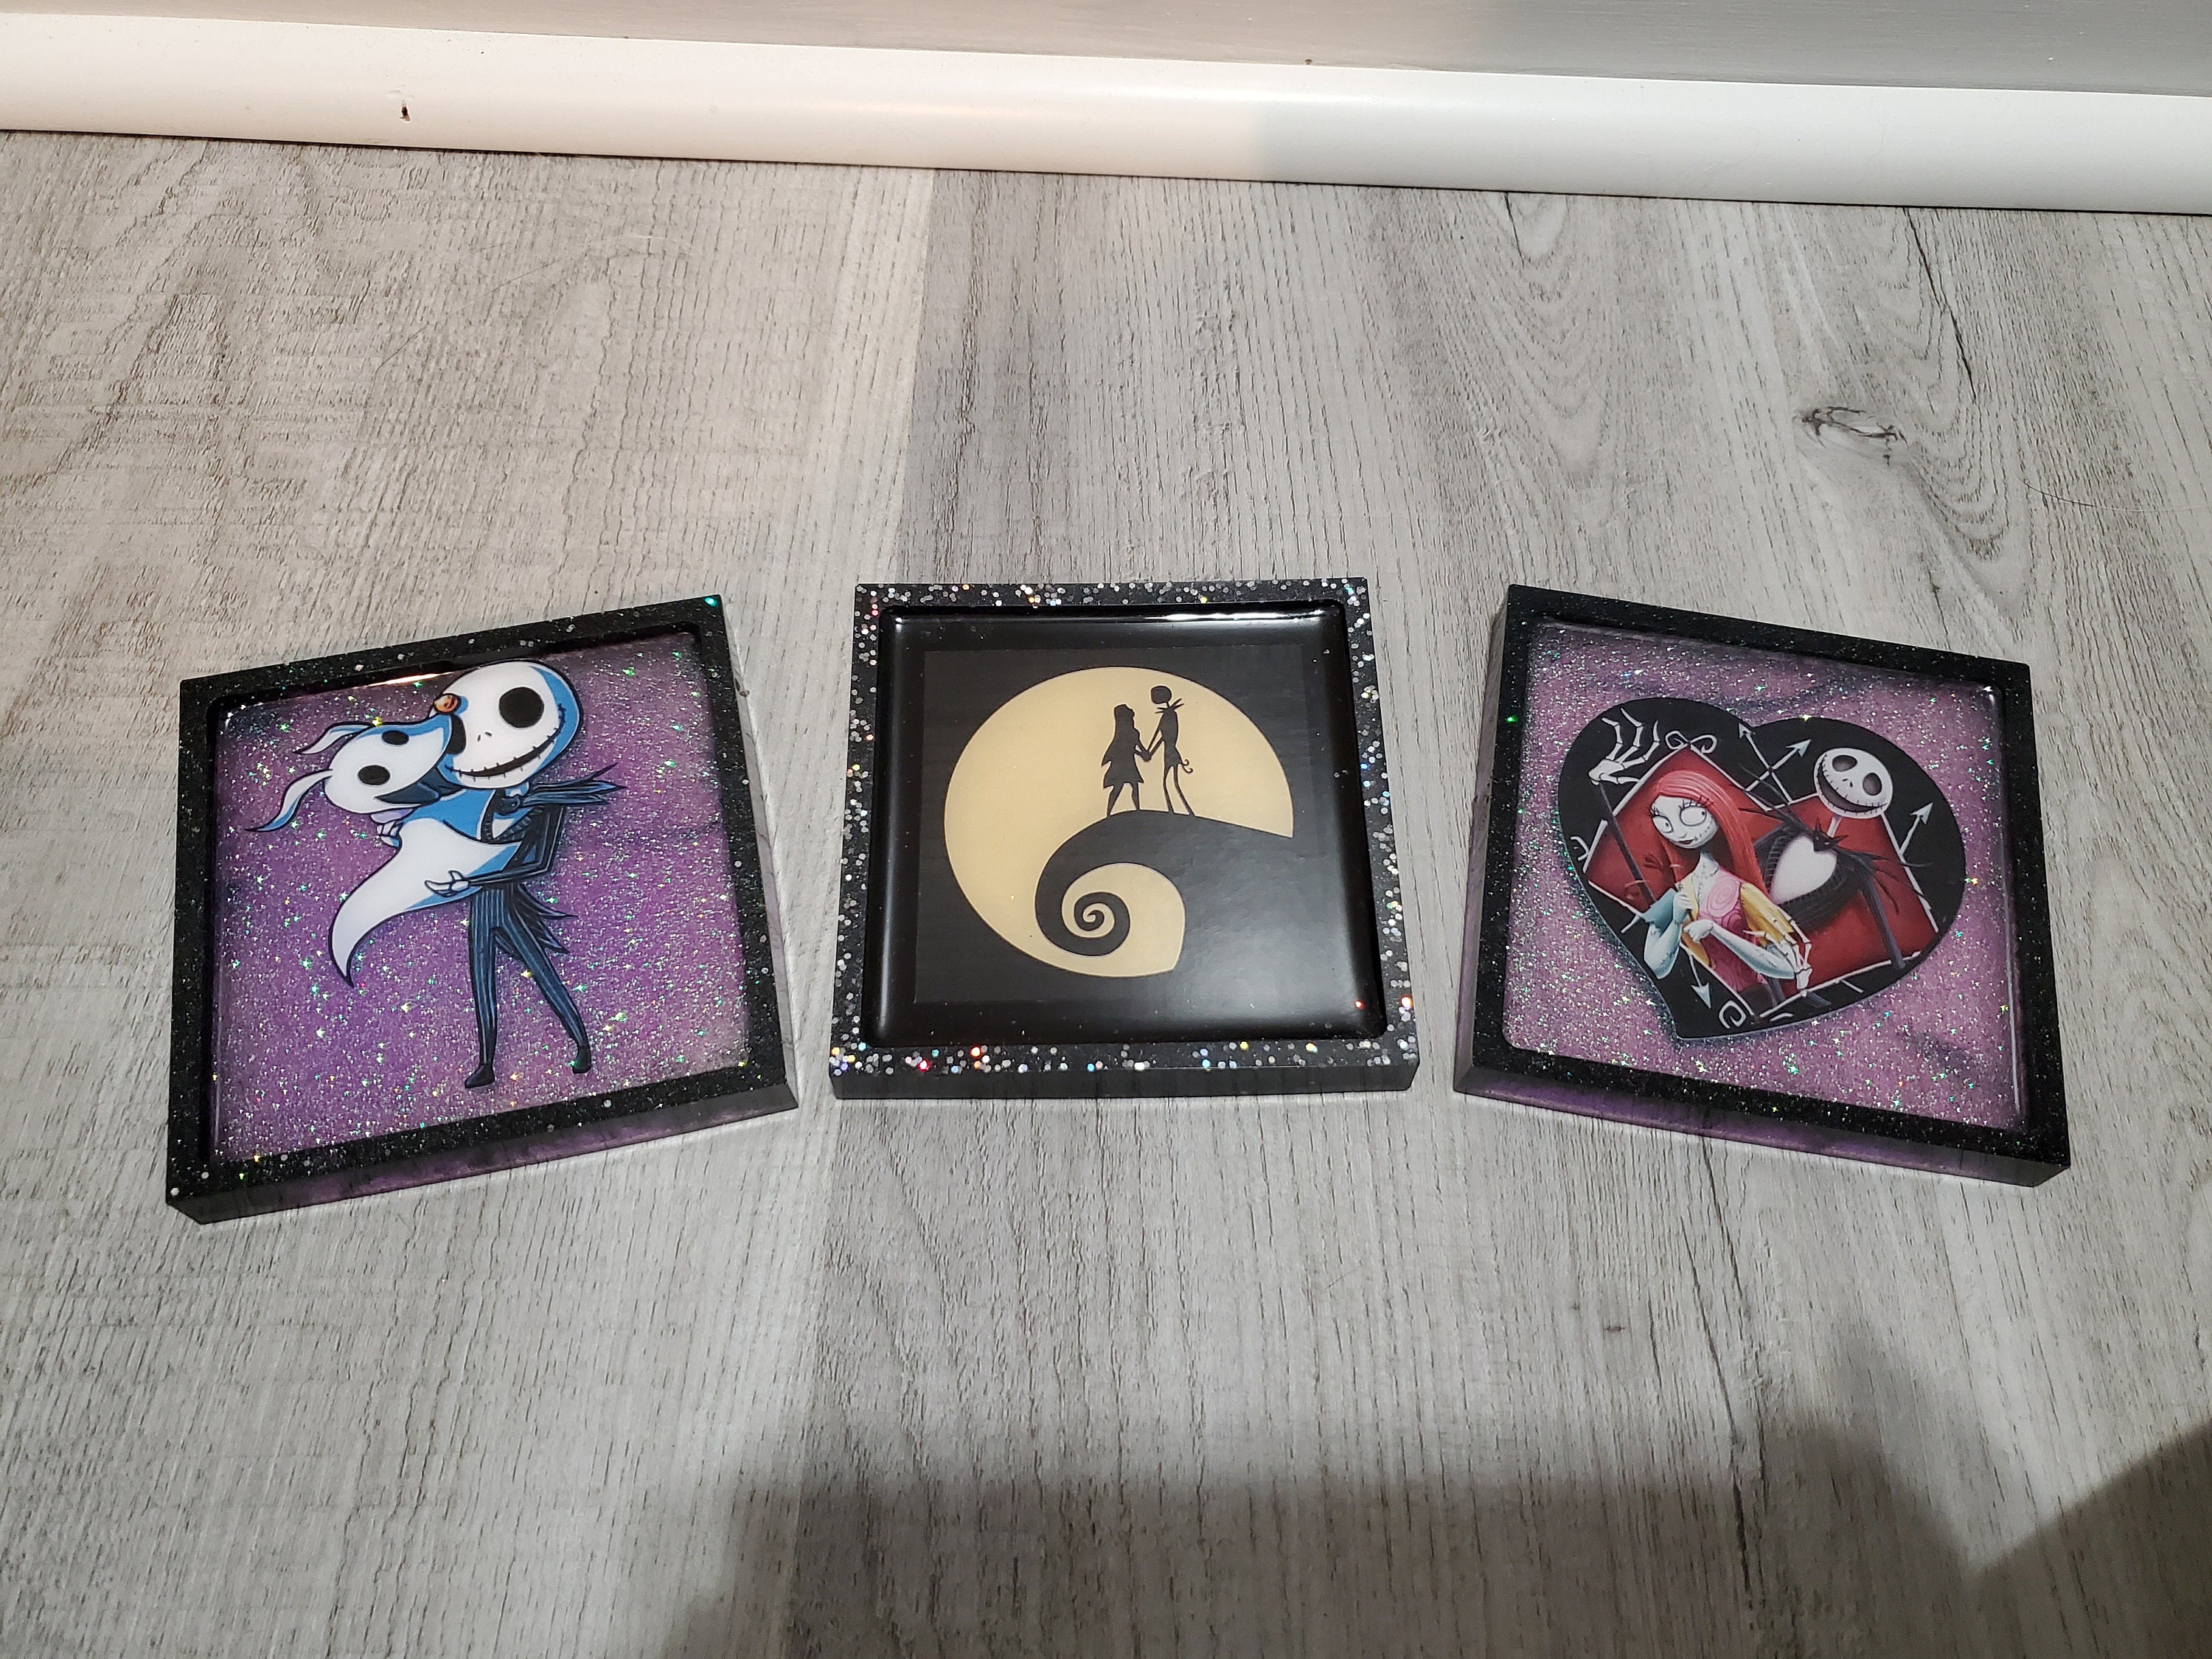 The NIGHTMARE BEFORE CHRISTMAS Handmade 6 Drink Coaster Set With Holder Home Decoration Engraved Clear Satin Protective Finish Housewarming